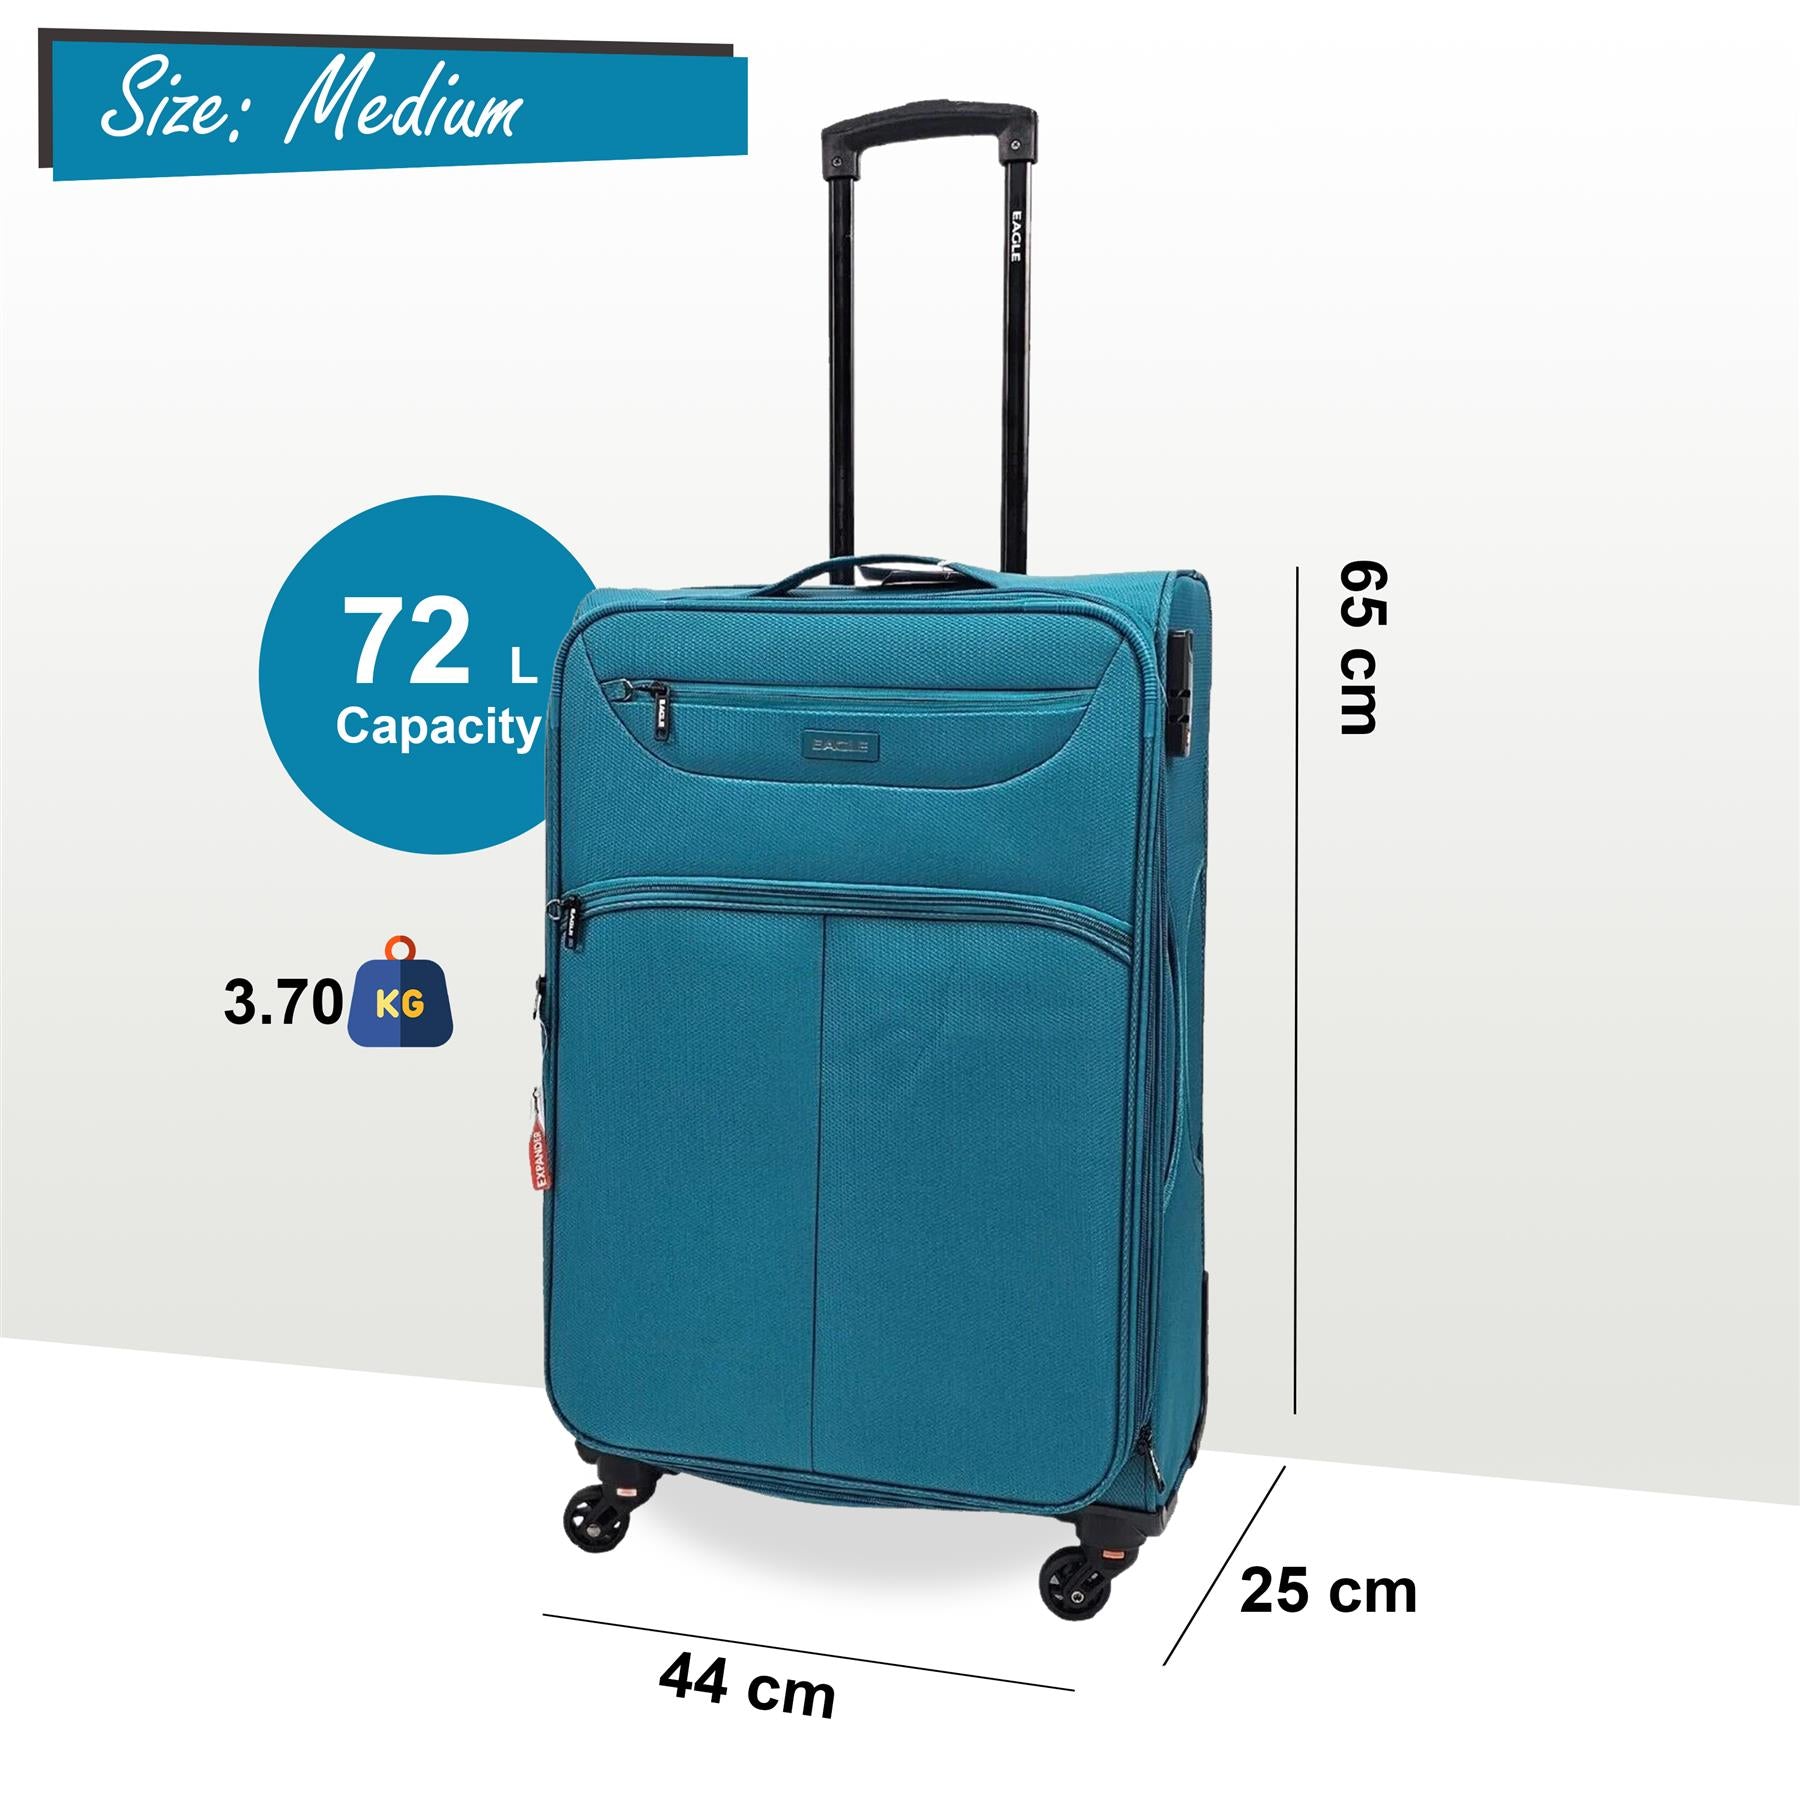 Baileyton Medium Soft Shell Suitcase in Teal